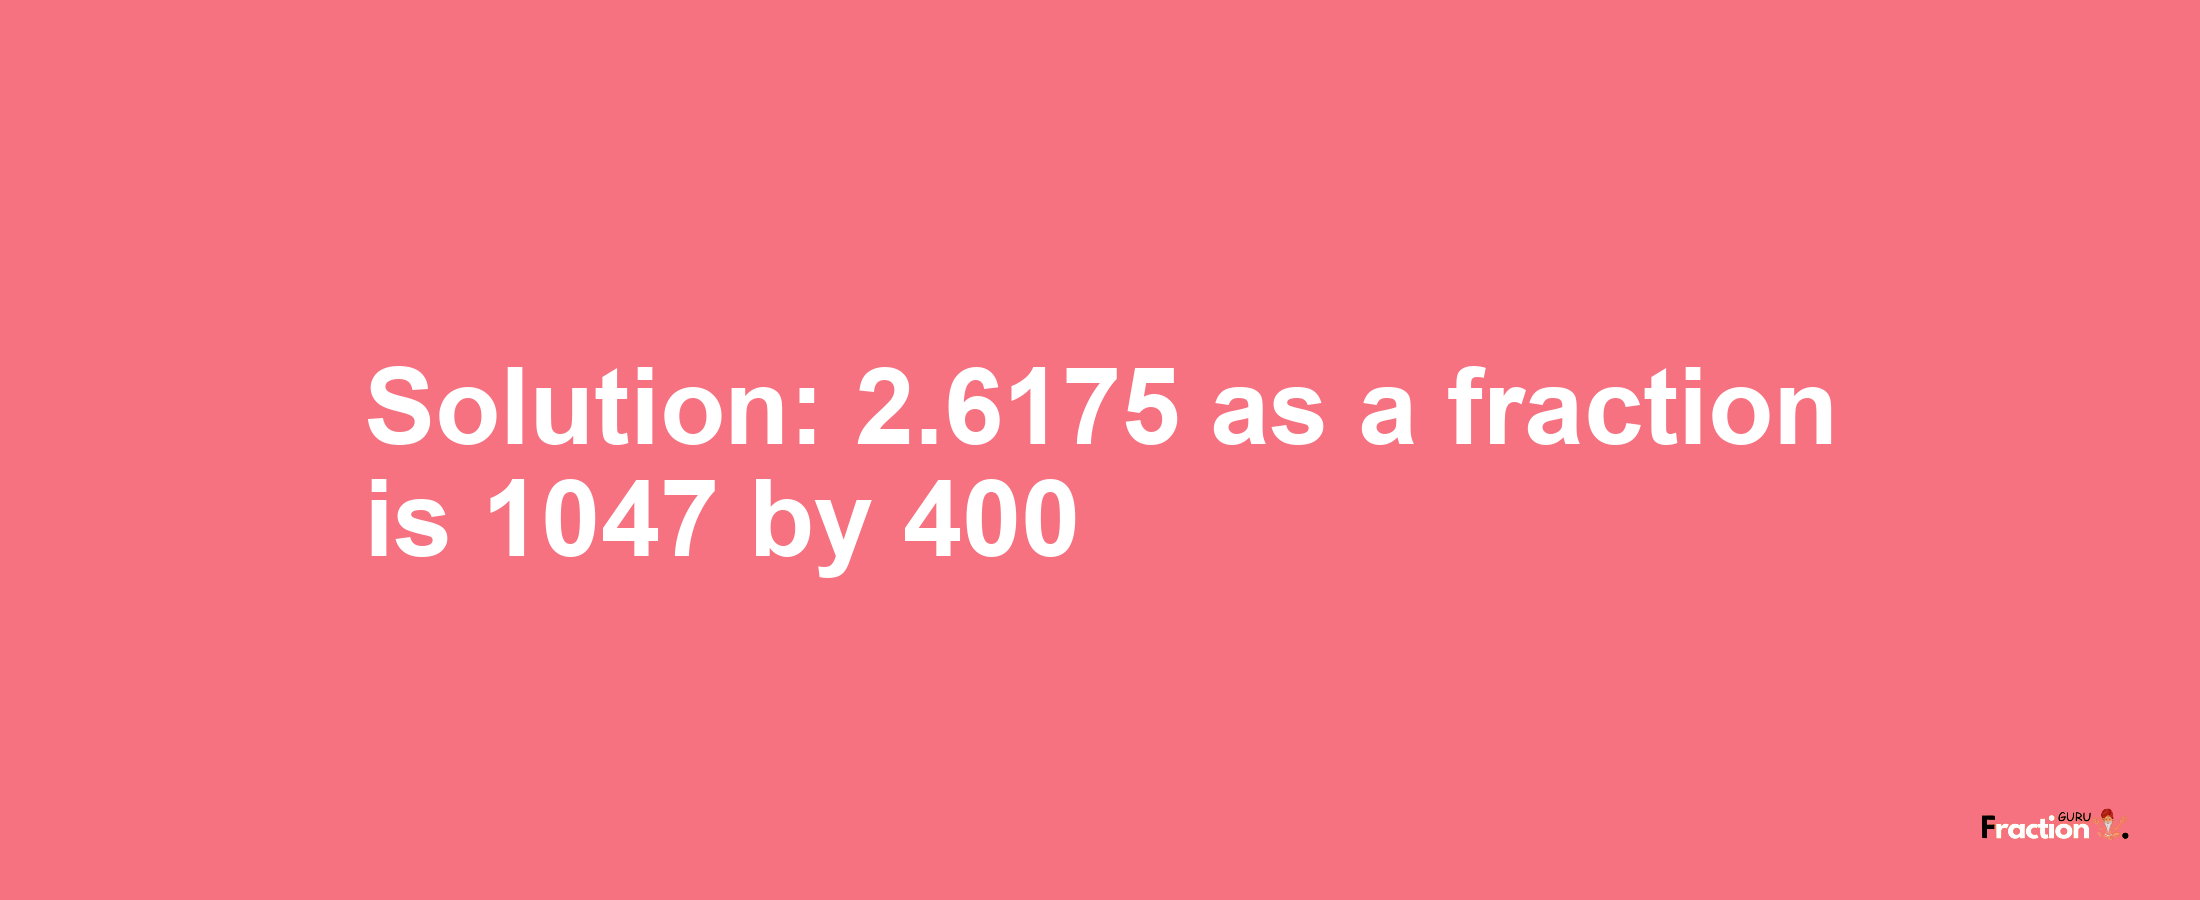 Solution:2.6175 as a fraction is 1047/400